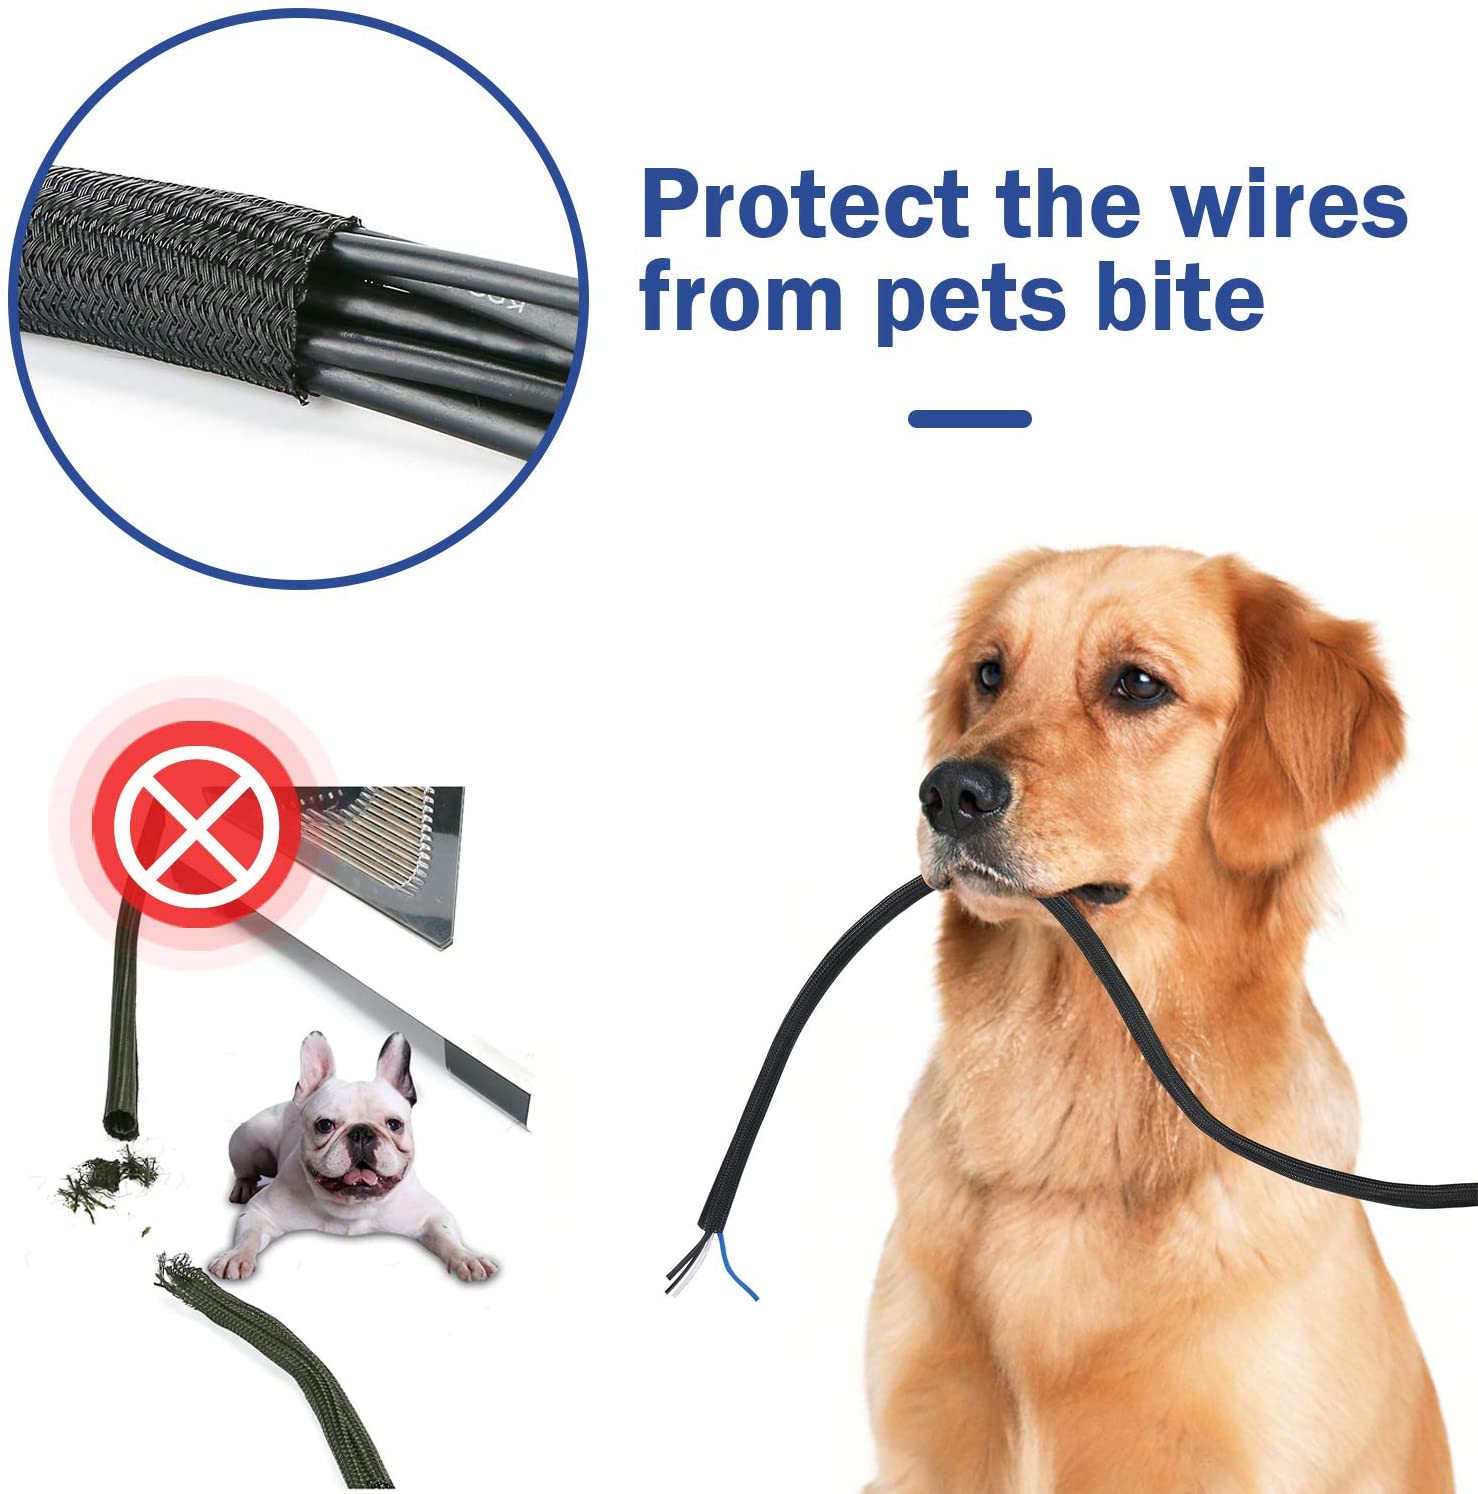 rodent resistant sleeving